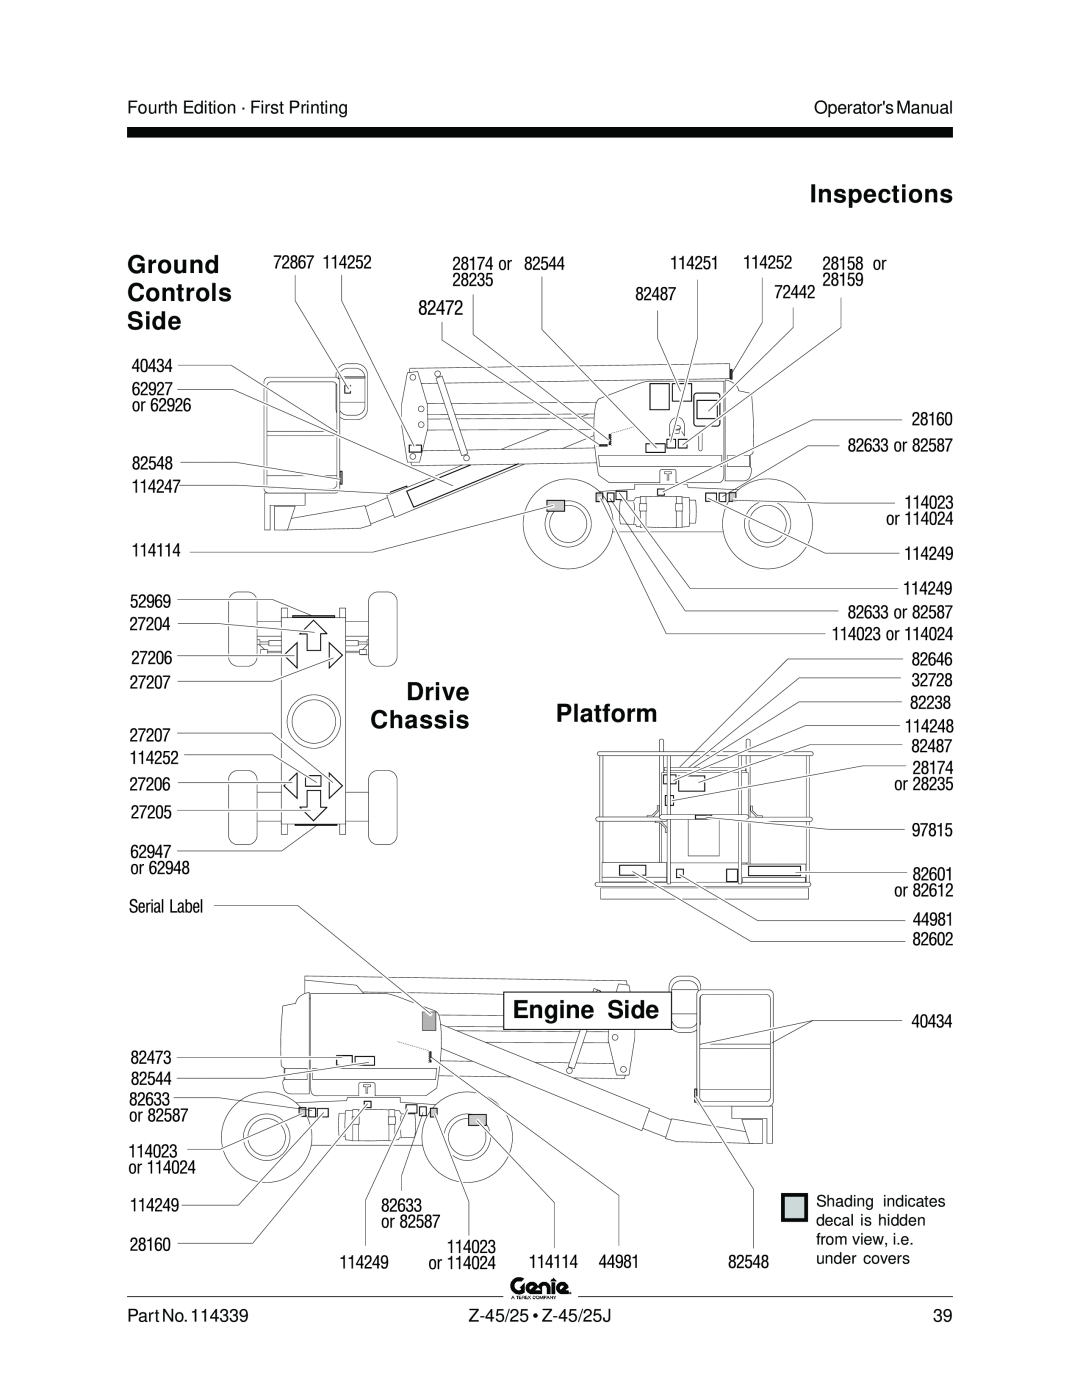 Genie Z-45, Z-25J Inspections Ground Controls Side Drive, Chassis Platform Engine Side, Fourth Edition · First Printing 